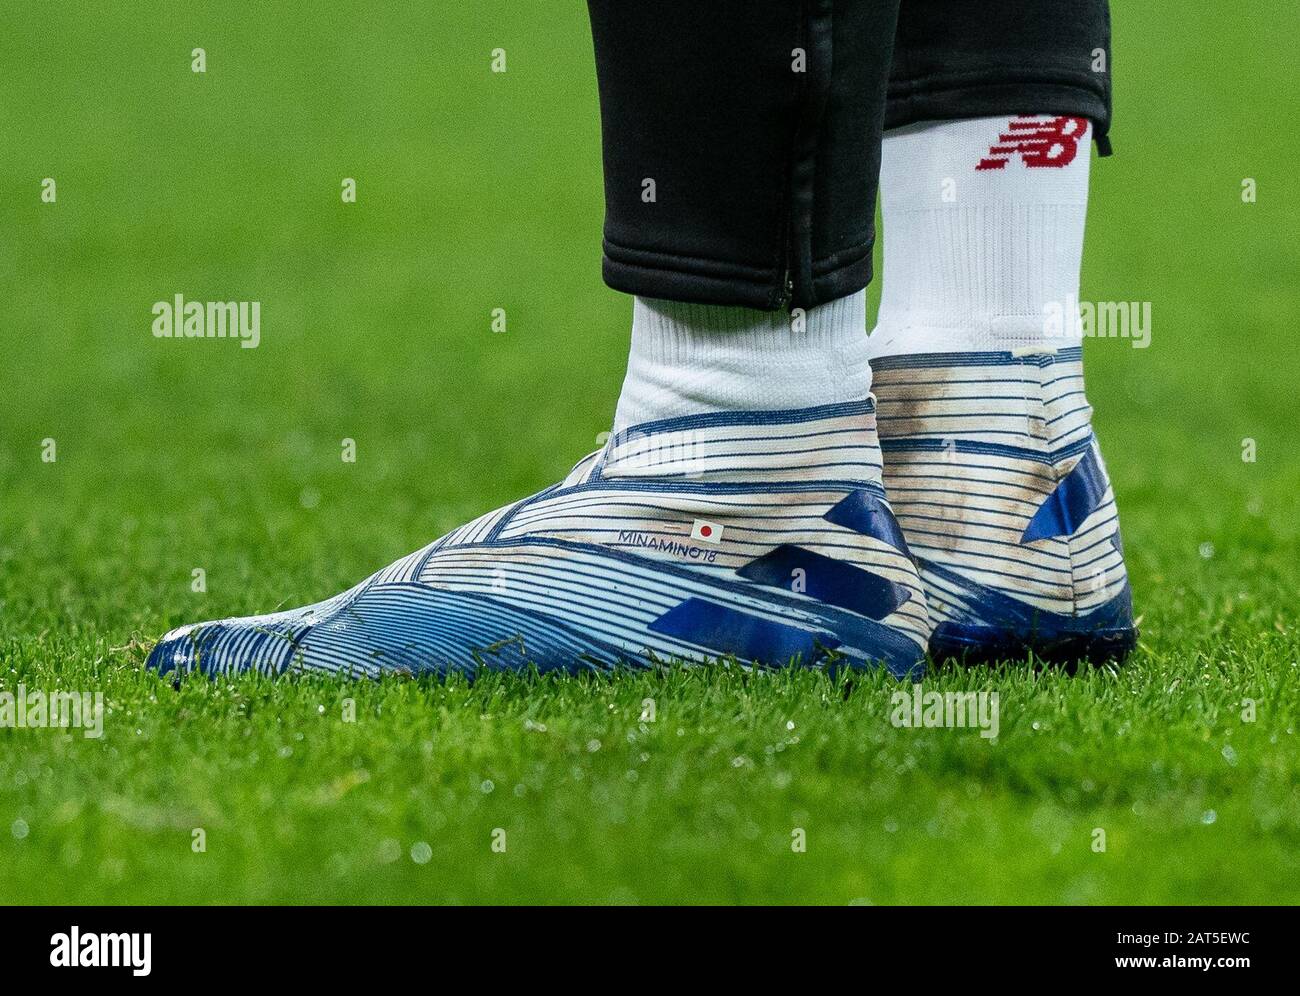 The Adidas Nemesis football boots of Takumi Minamino of Liverpool  displaying Japan flag during the Premier League match between West Ham  United and Liverpool at the Olympic Park, London, England on 29